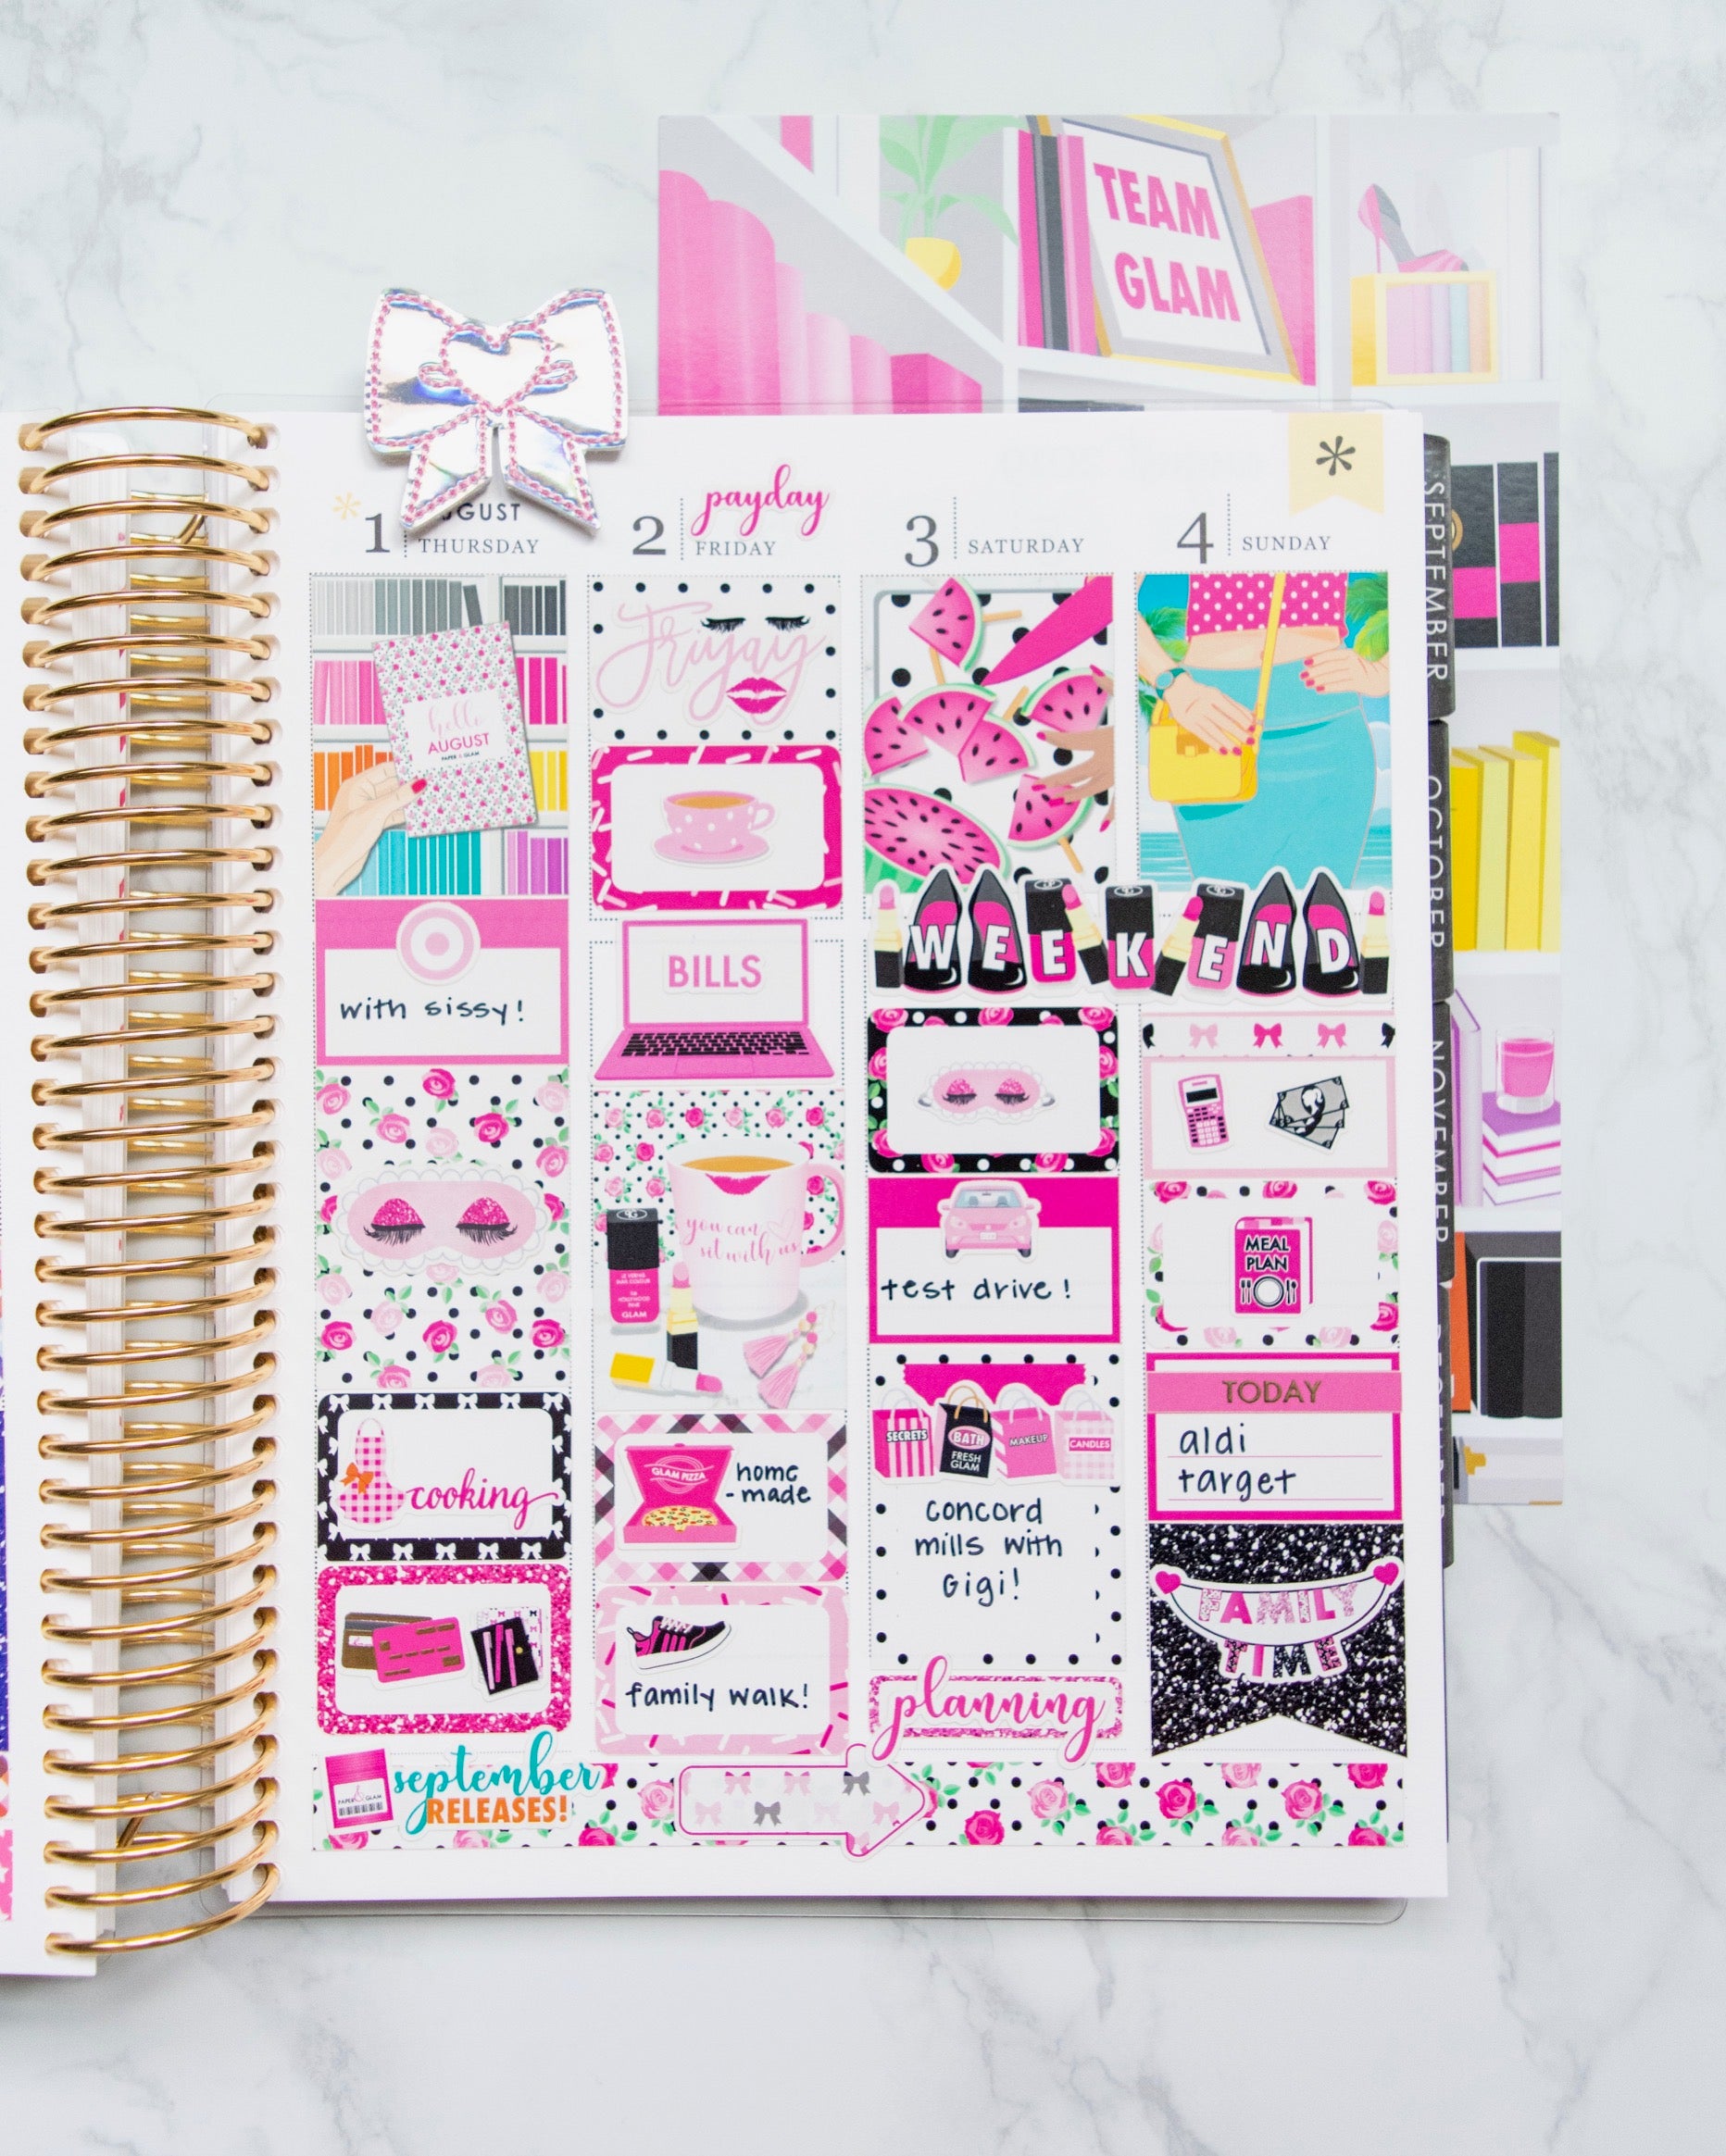 Glam January Digital Planner Stickers – Paper & Glam